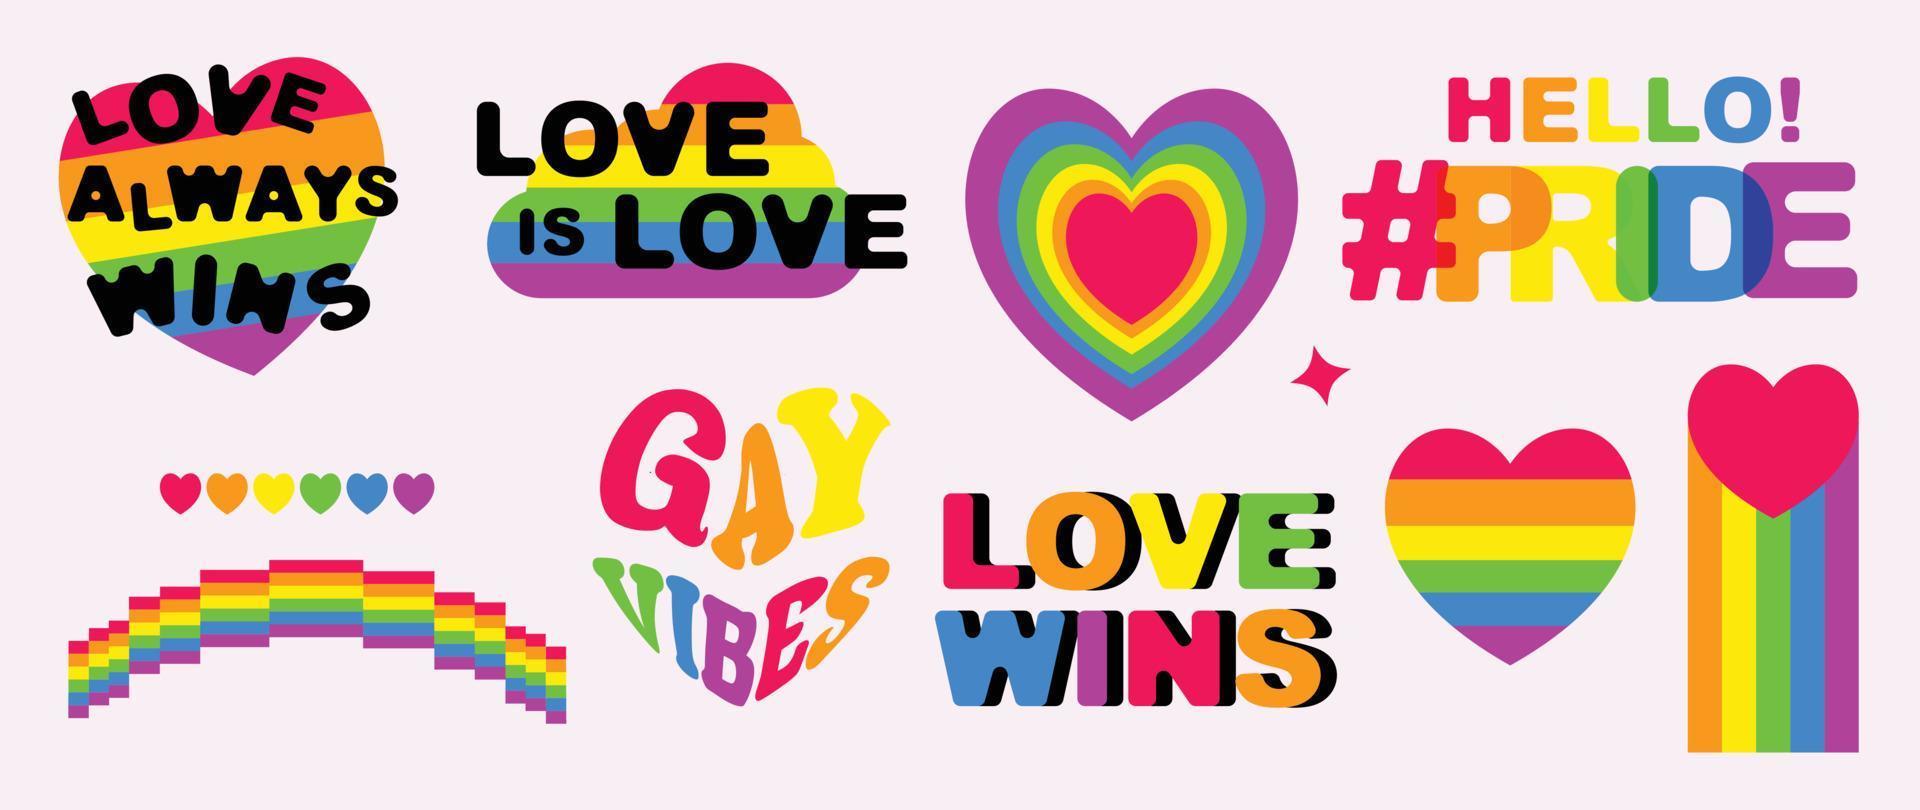 Happy Pride LGBTQ element set. LGBTQ community symbols with rainbow, heart, quote. Elements illustrated for pride month, bisexual, transgender, gender equality, sticker, rights concept. vector